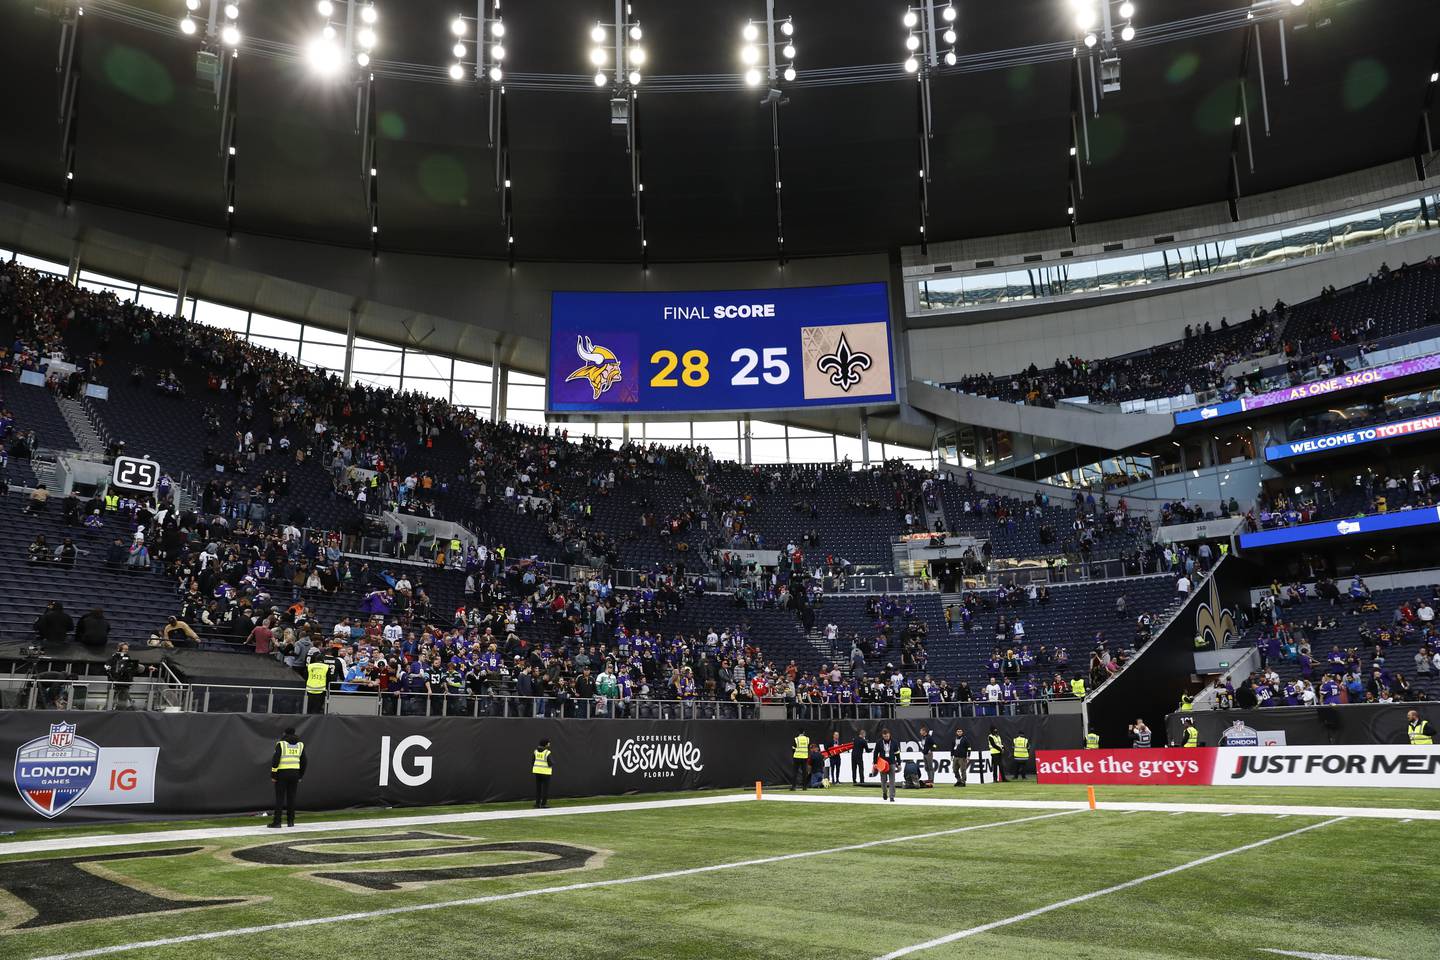 The general view of the screen showing the final score after an NFL game between the Saints and the Vikings on Sunday at Tottenham Hotspur Stadium in London. The Vikings won 28-25. 